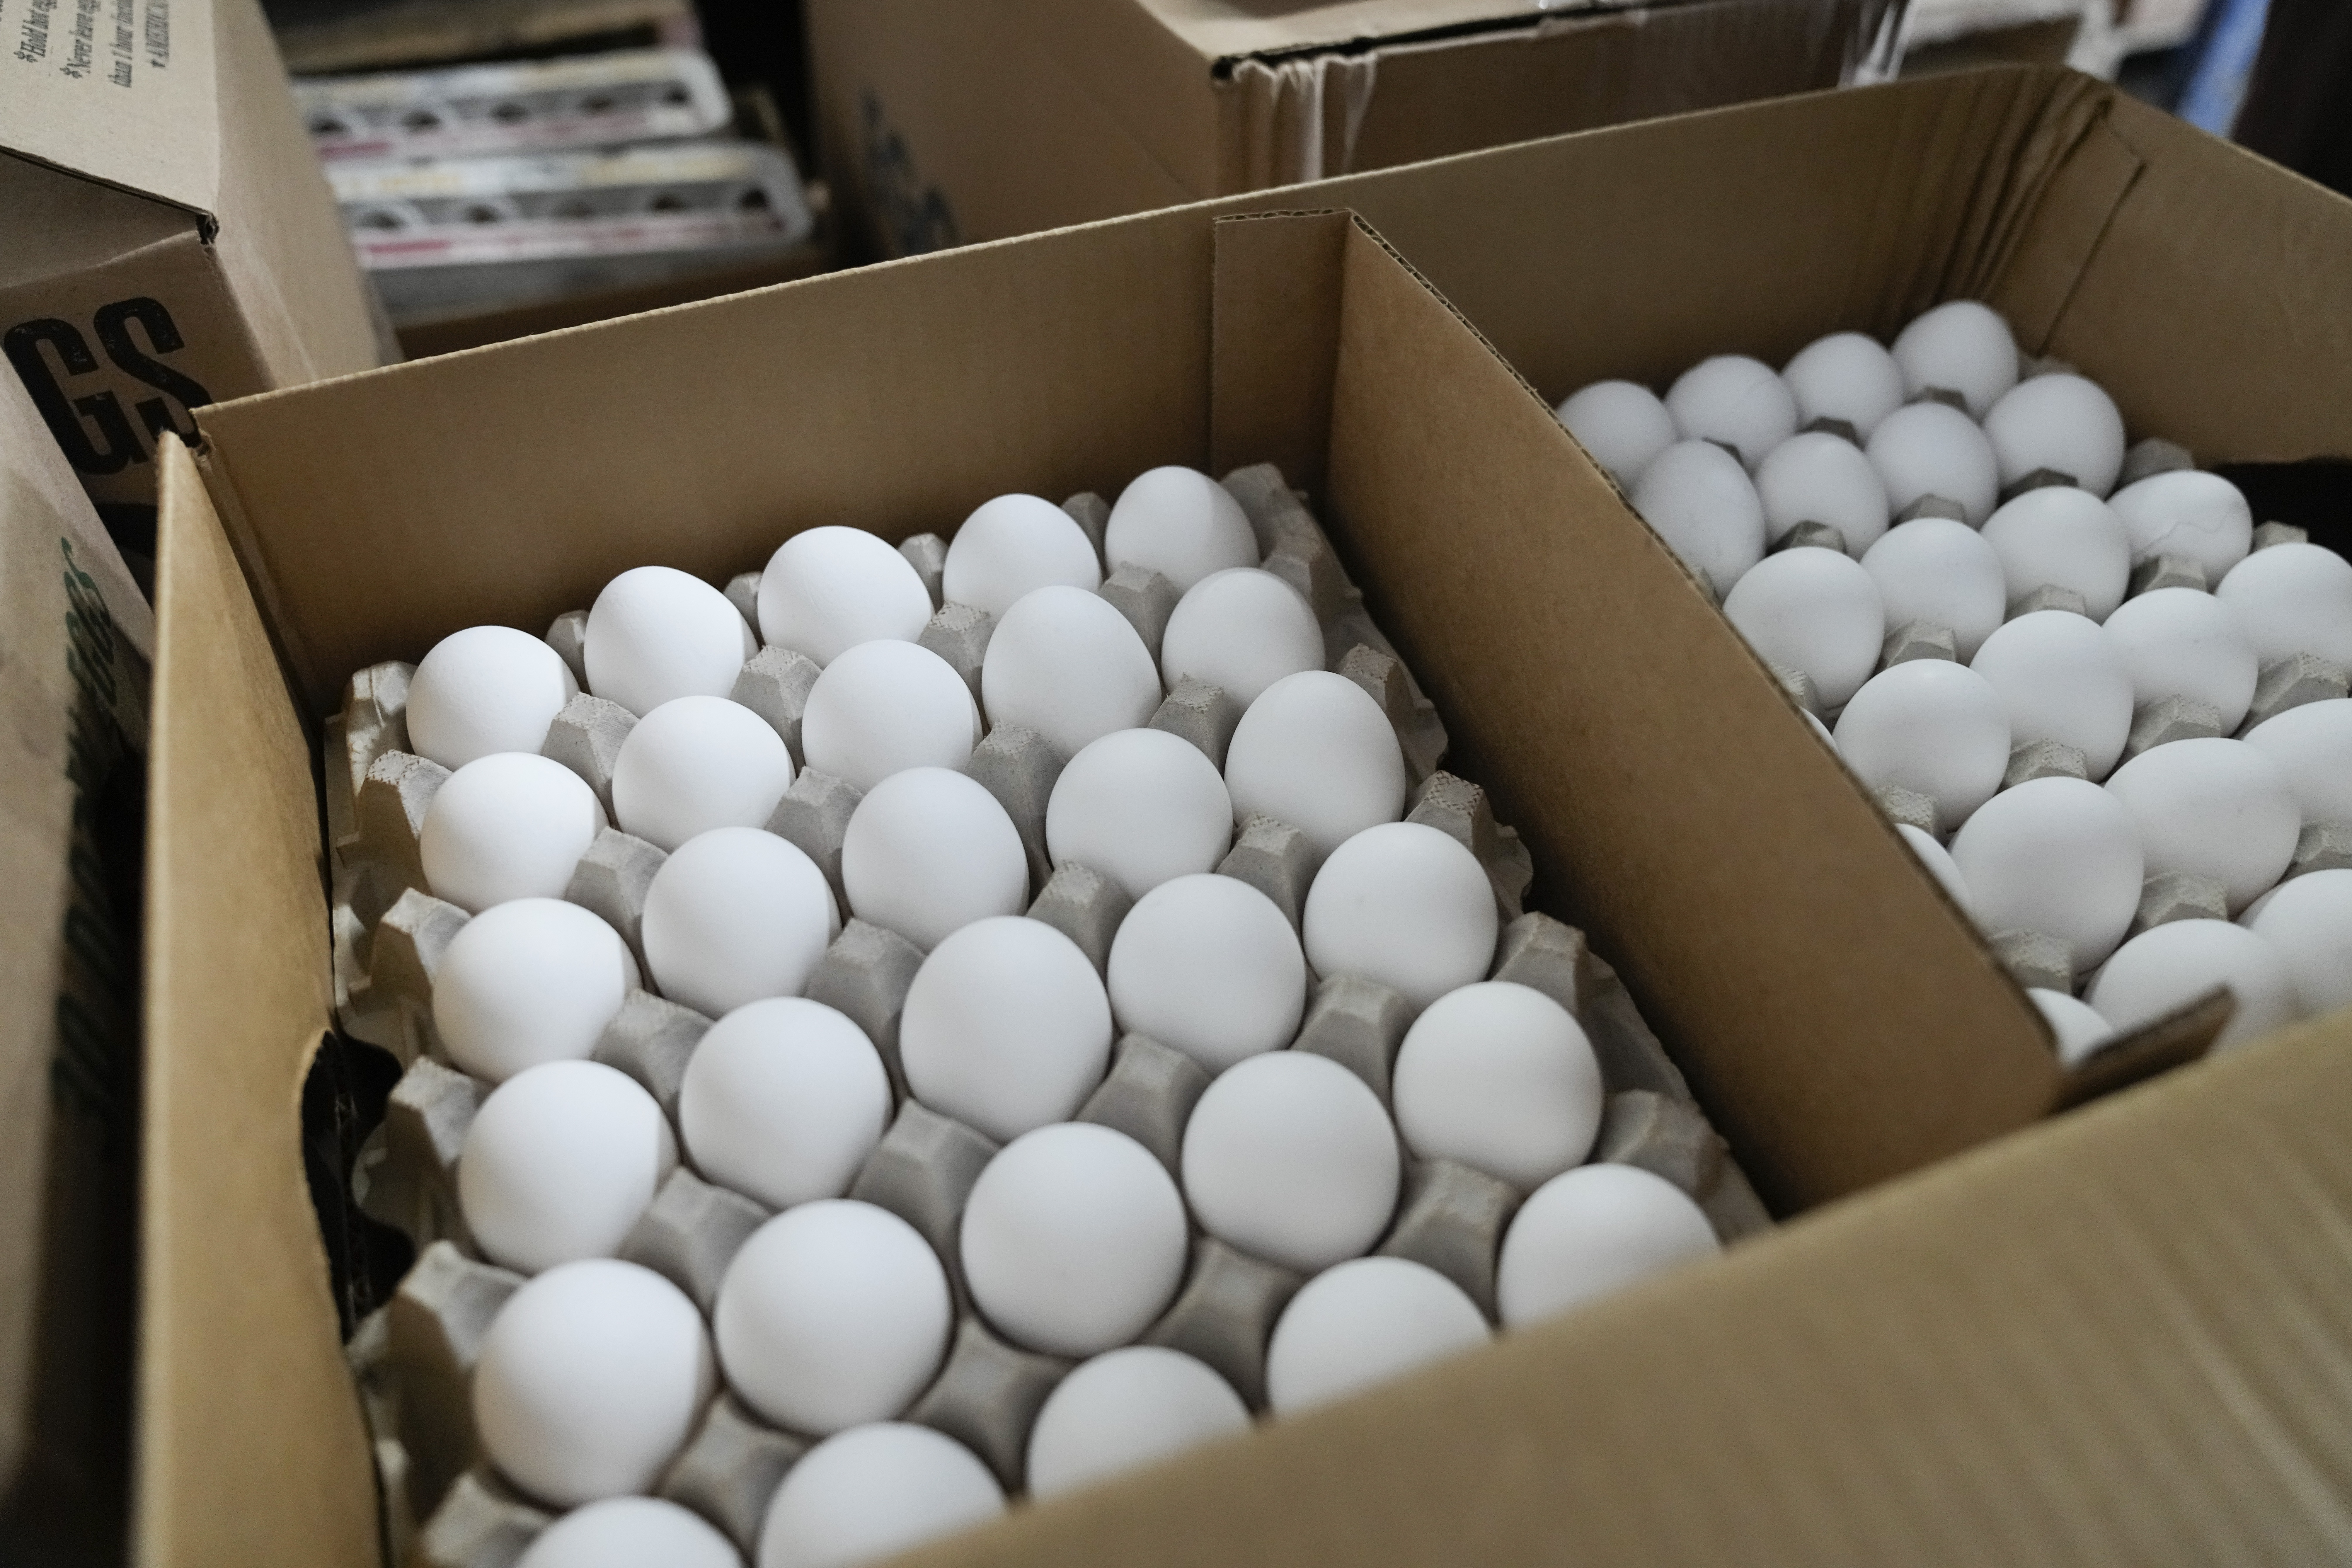 Bird flu, soaring costs cause egg prices to skyrocket